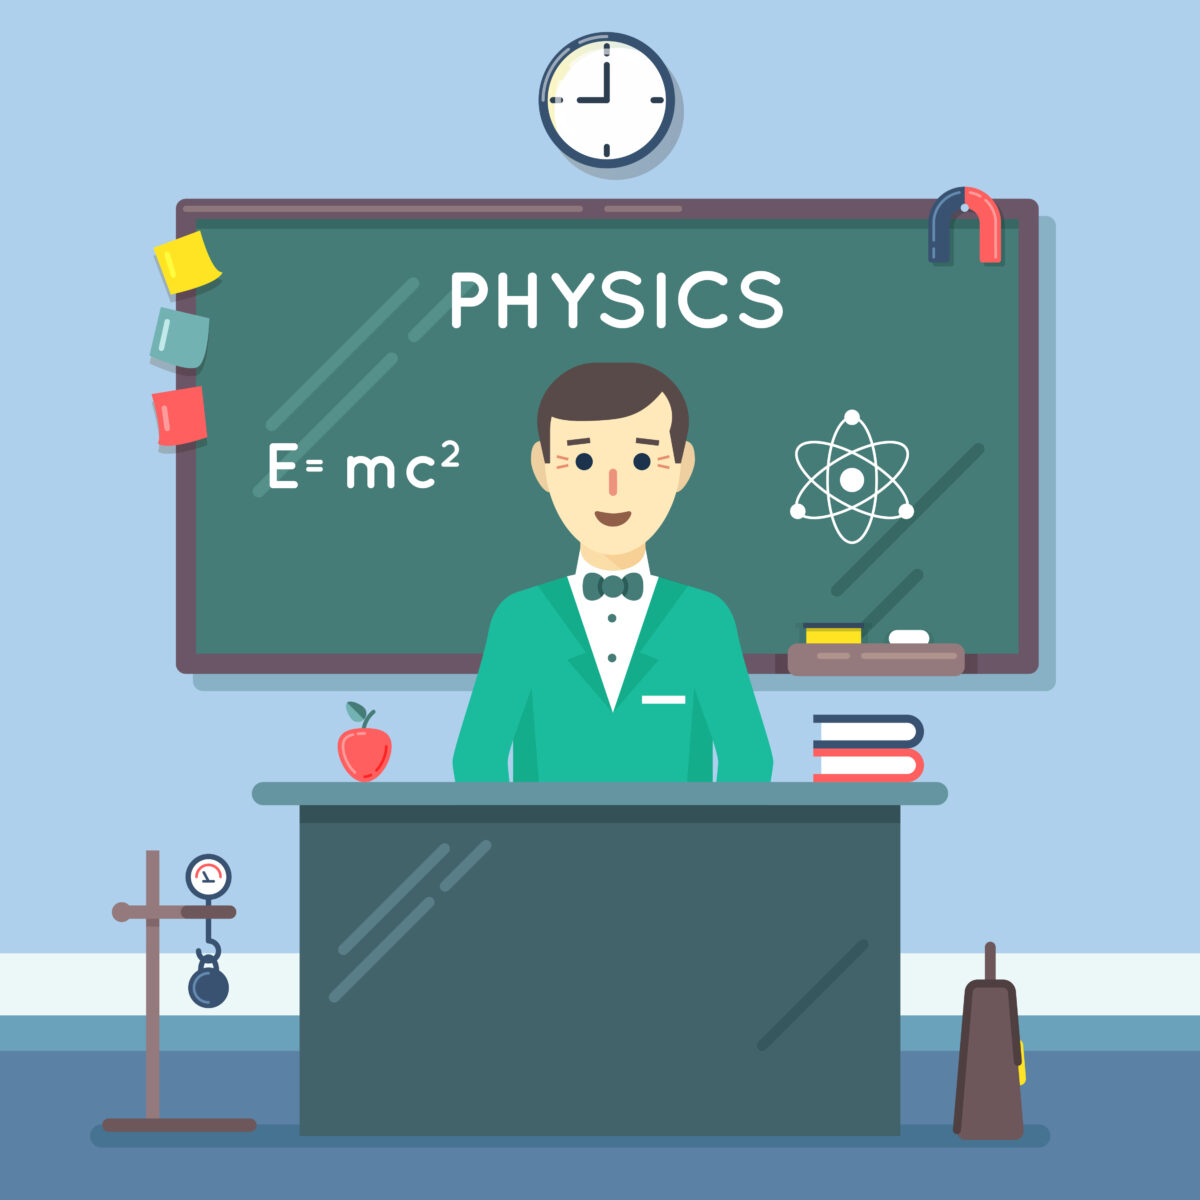 https://examshelpers.com/pay-someone-to-take-my-physics-test-exam-quiz/